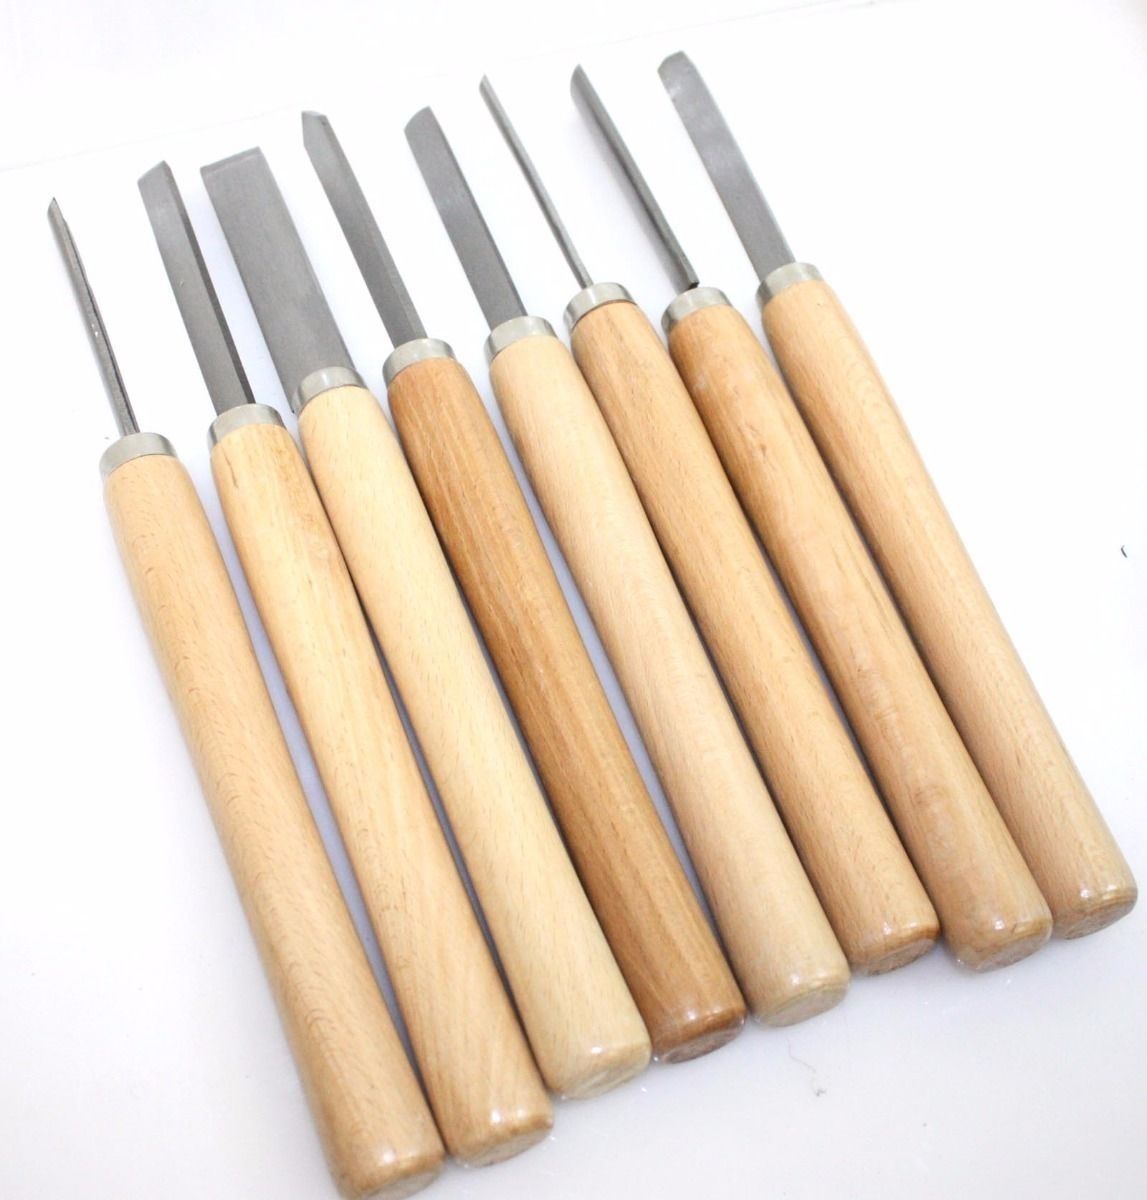 Silver 8Pcs Wood Turning Lathe Chisel Set Spear Woodworking Carving Hand Tools 